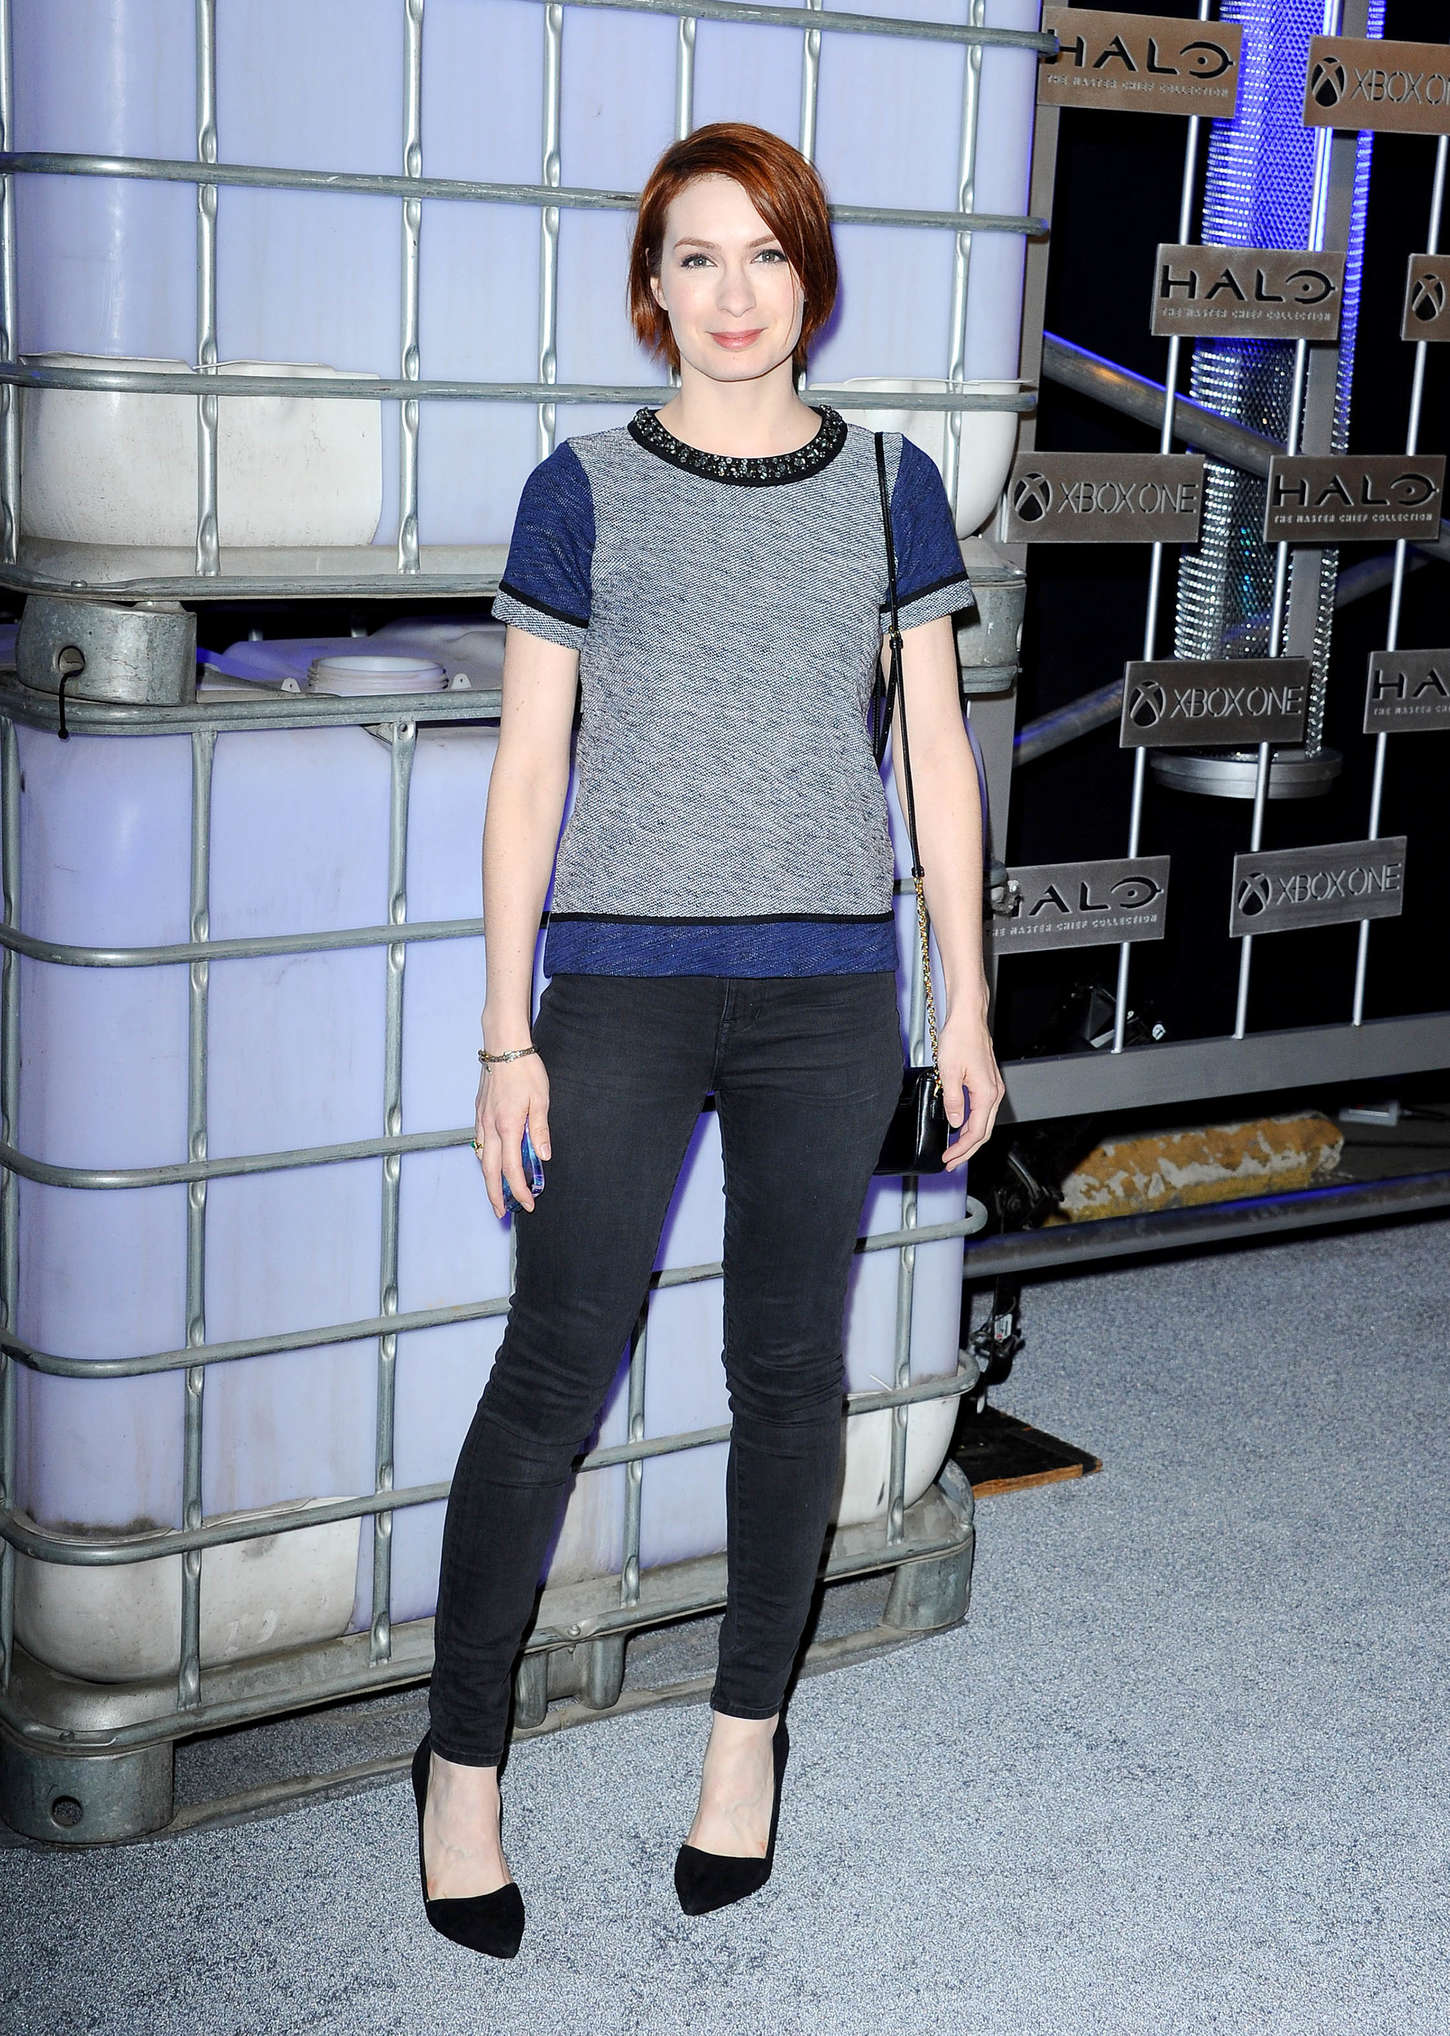 Felicia Day HaloFest Halo The Master Chief Collection Launch Event in Hollywood